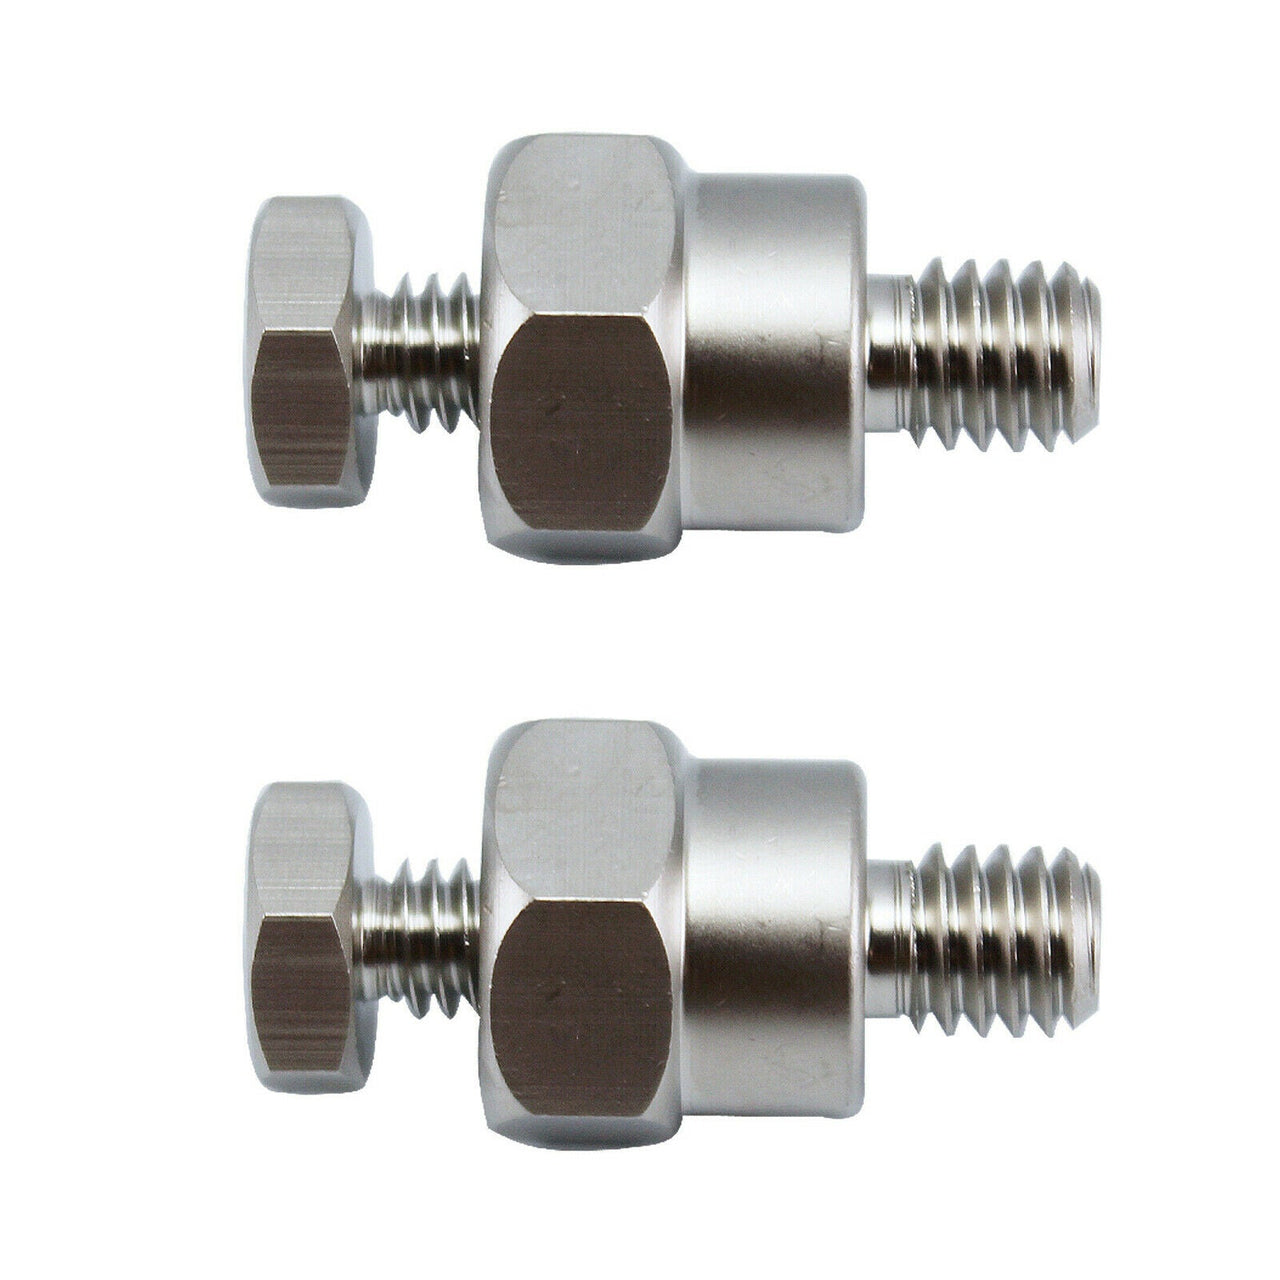 2 Absolute BTC-50 GM Side Post Terminals <br/>GM Short Side Post Mount Positive Negative Battery Terminal Chrome Plated